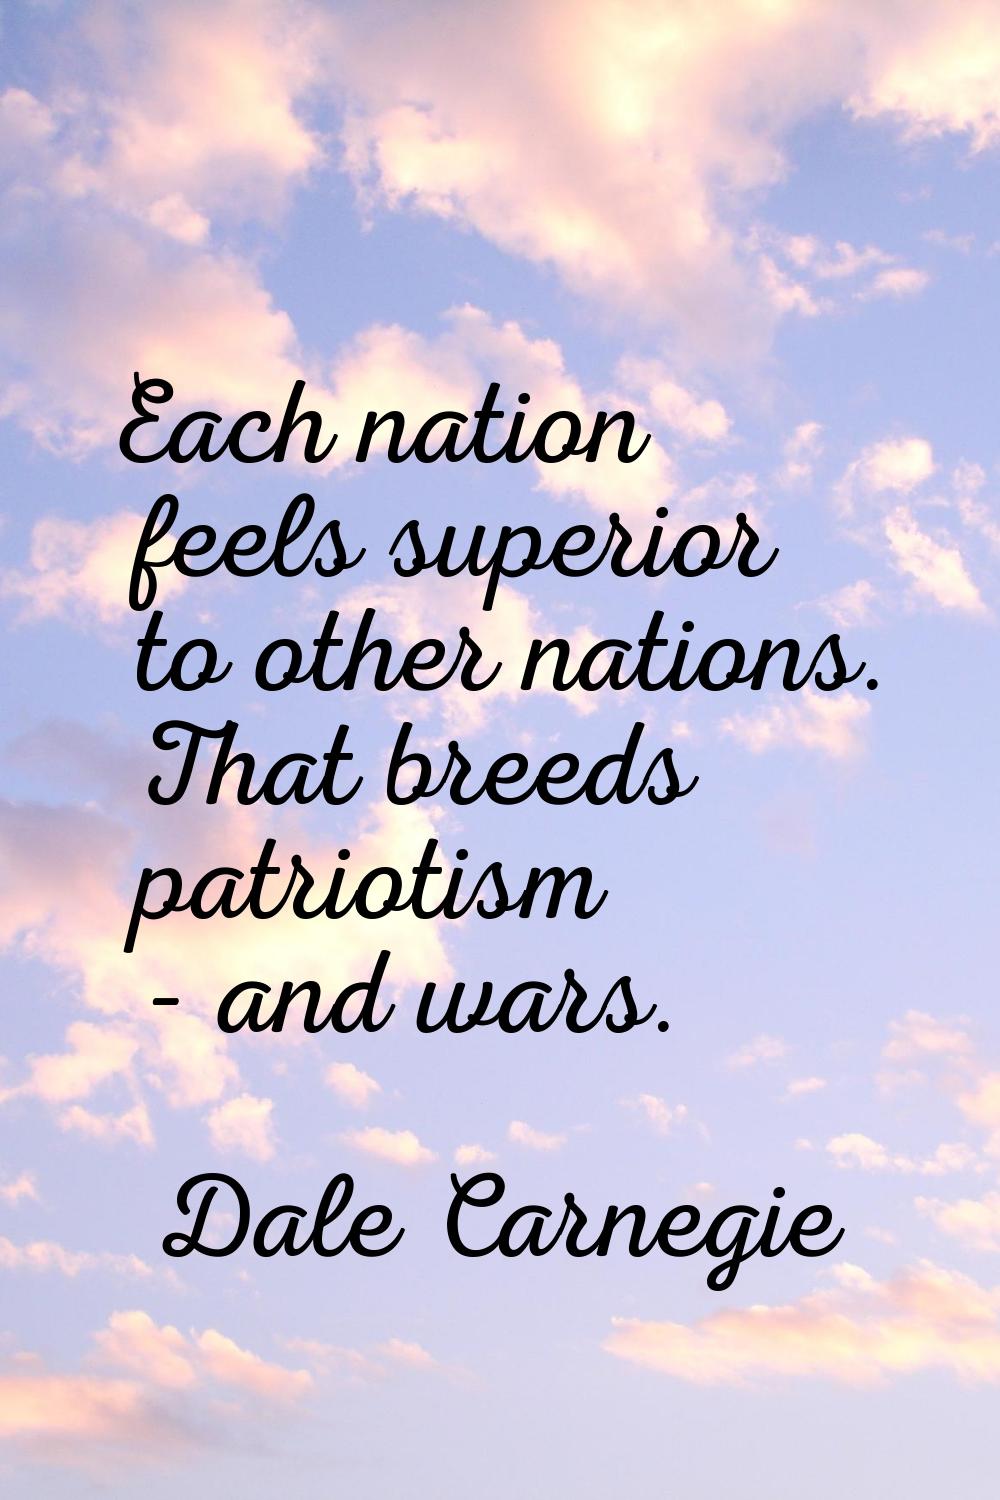 Each nation feels superior to other nations. That breeds patriotism - and wars.